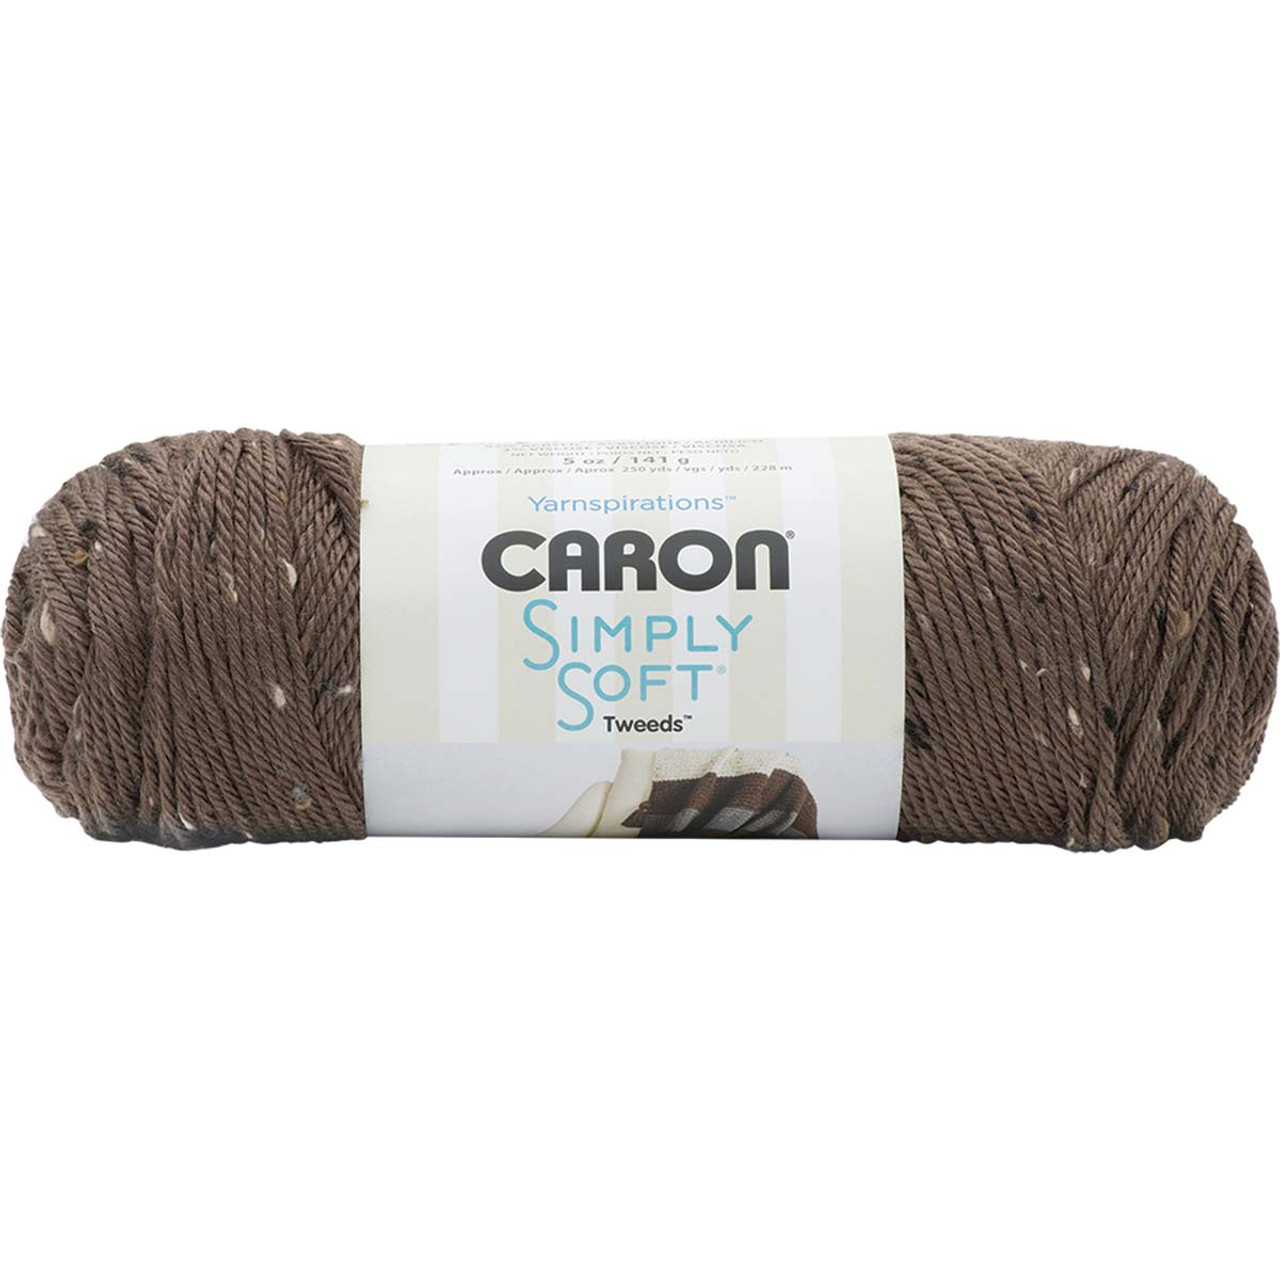 Caron Simply Soft Tweeds Yarn Off White, Multipack of 3